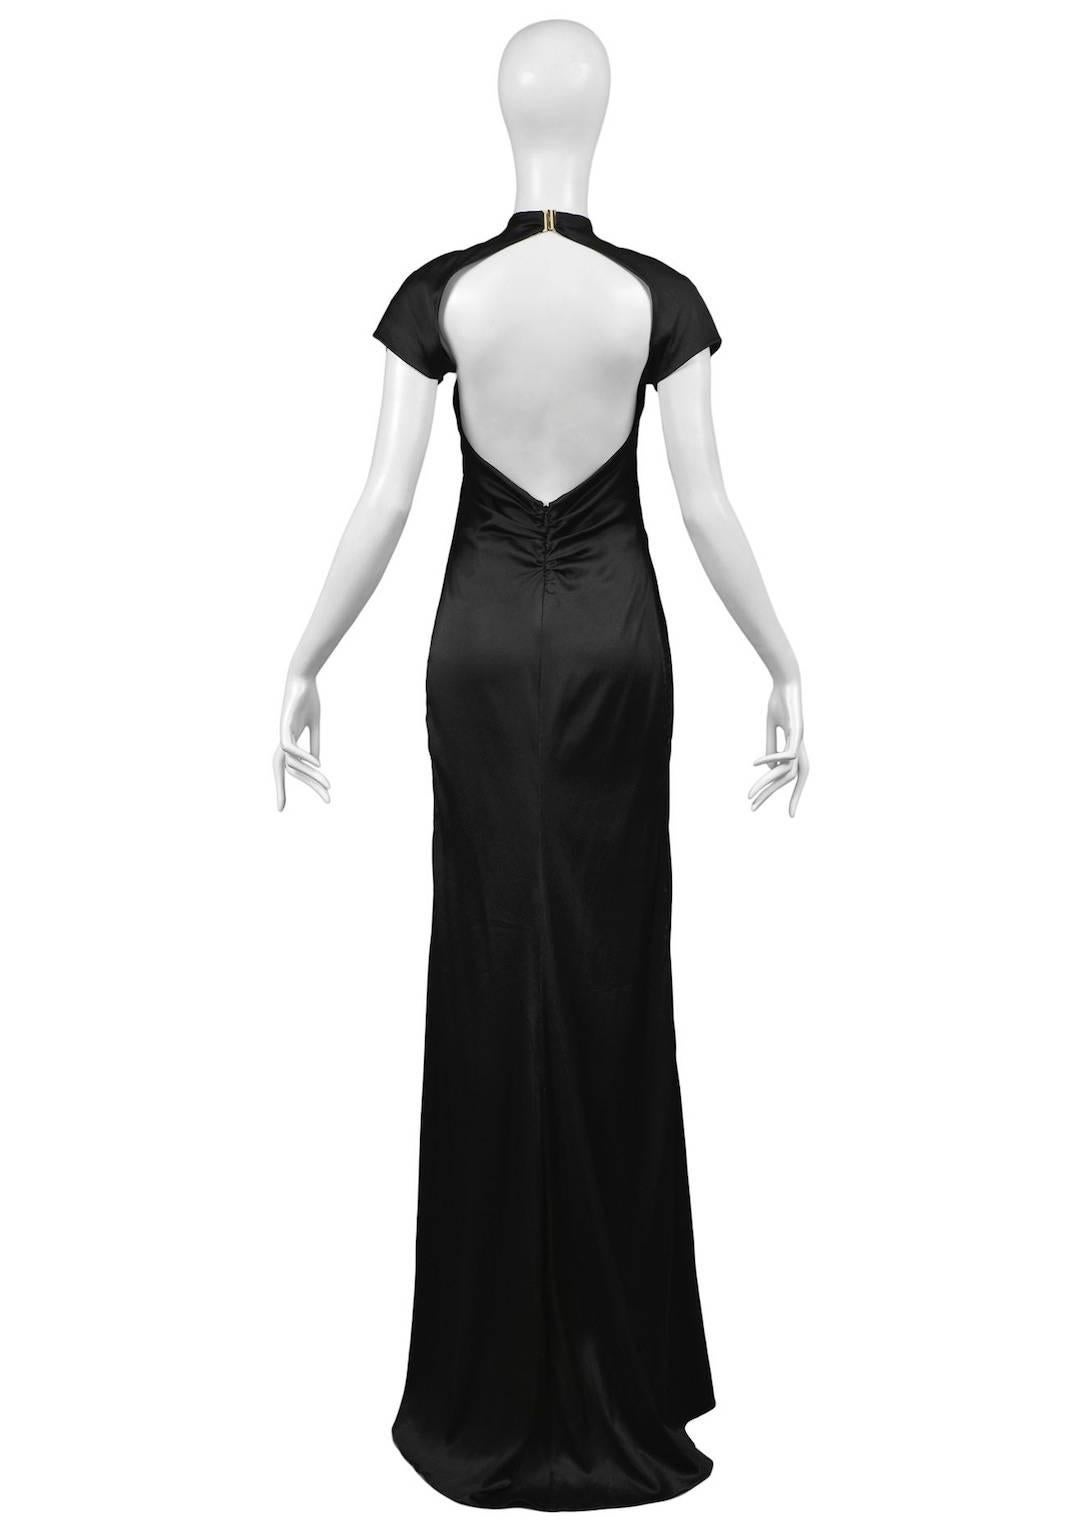 Tom Ford for Gucci Black Satin Knot Gown 1